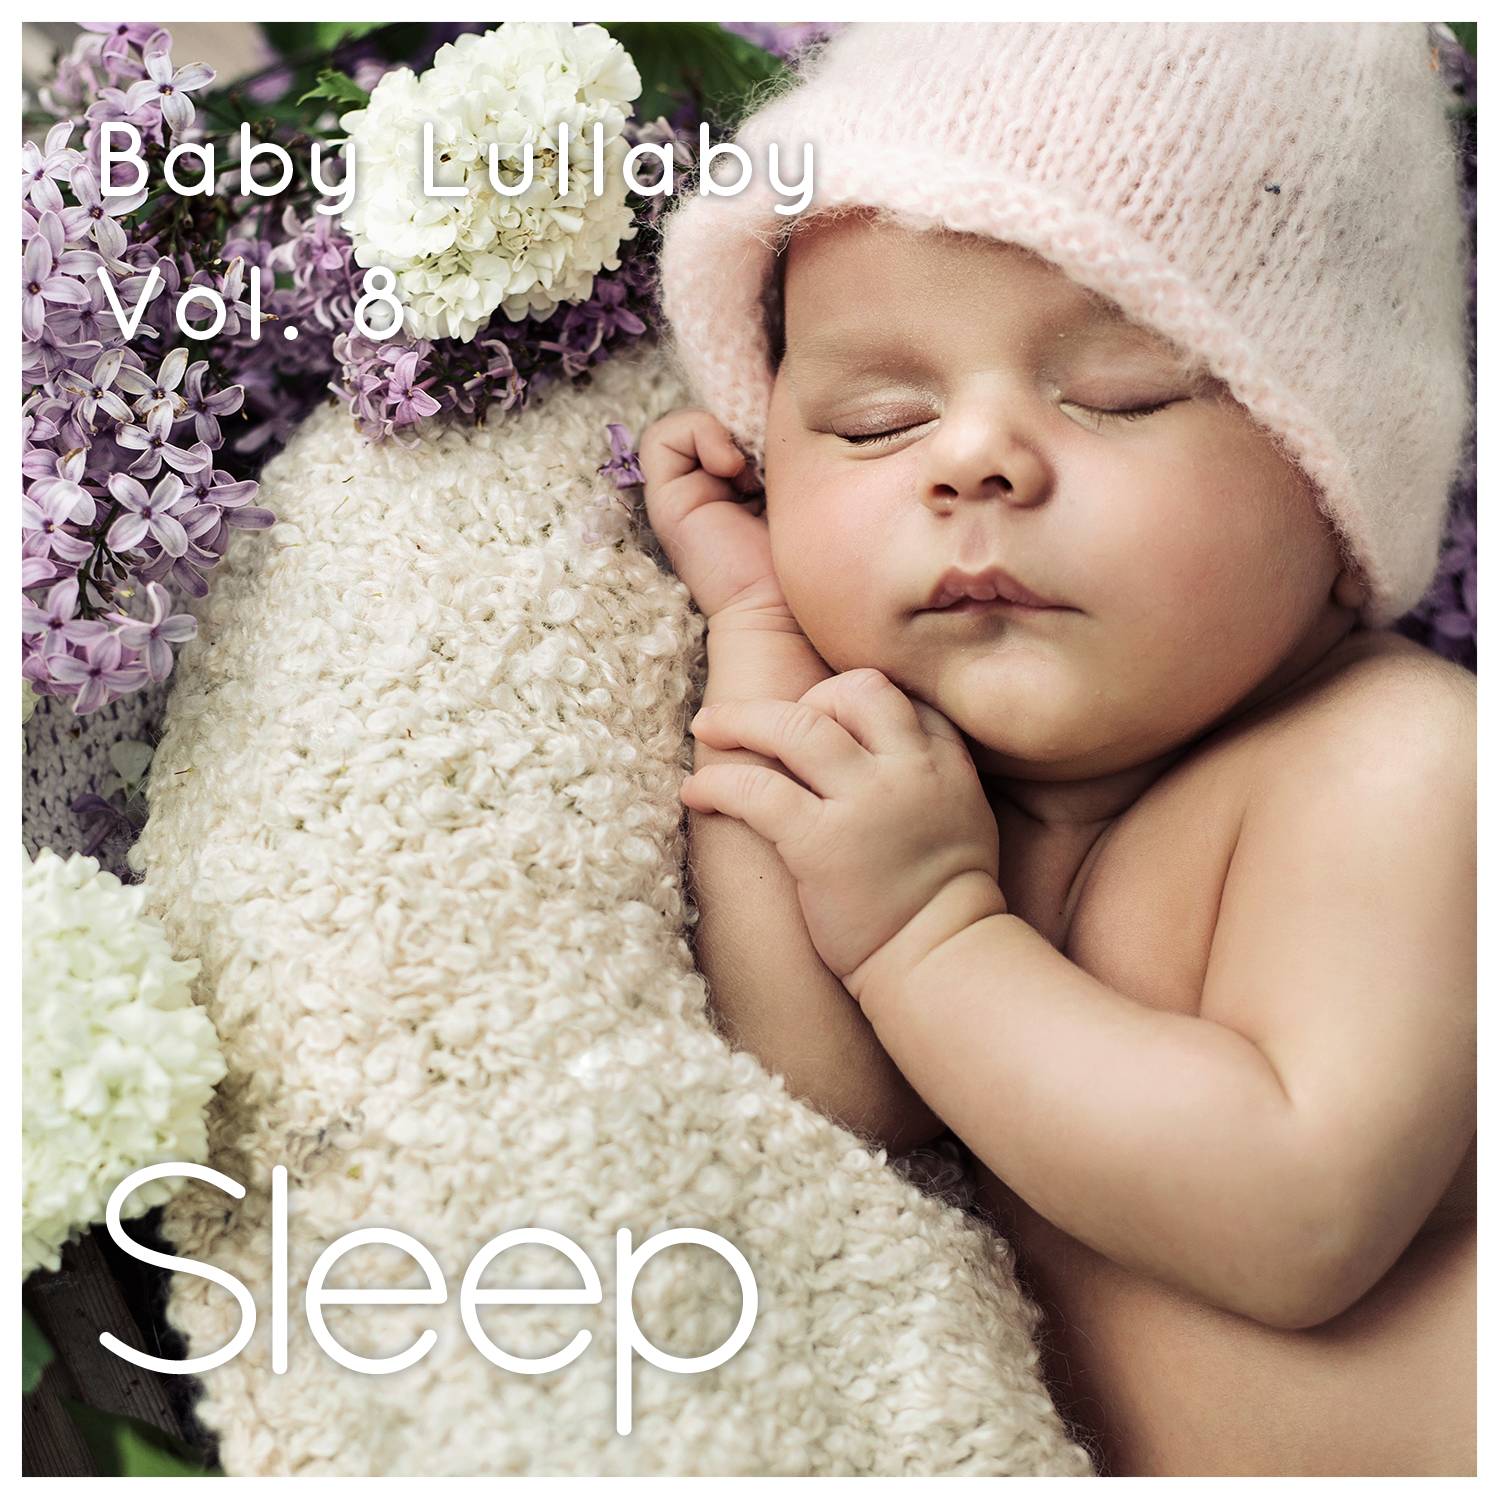 Baby Sleep Ambient Lullaby, Pt. 37